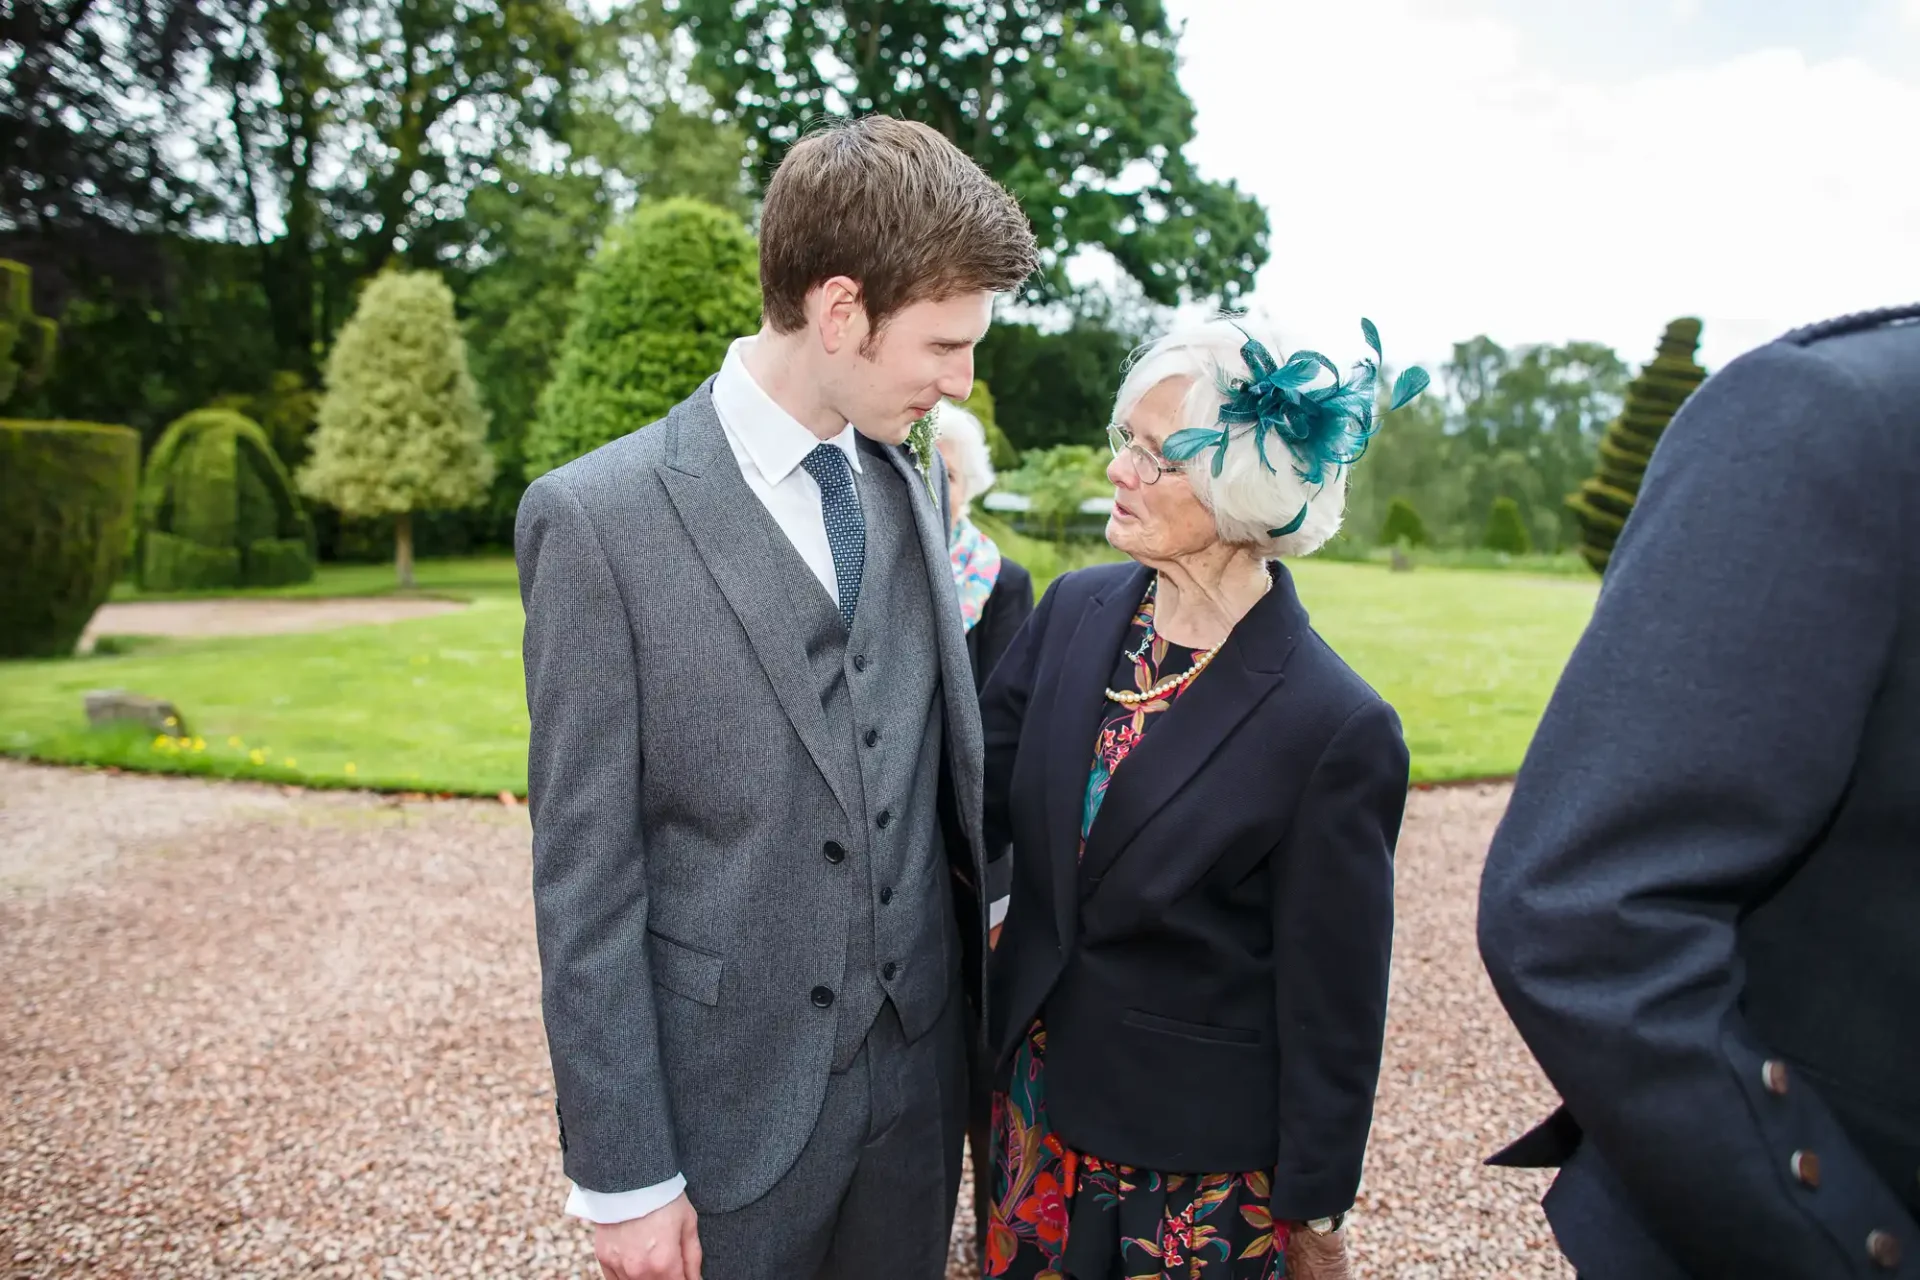 A young man in a grey suit looks affectionately at an elderly woman with a blue fascinator and floral dress at a garden event.